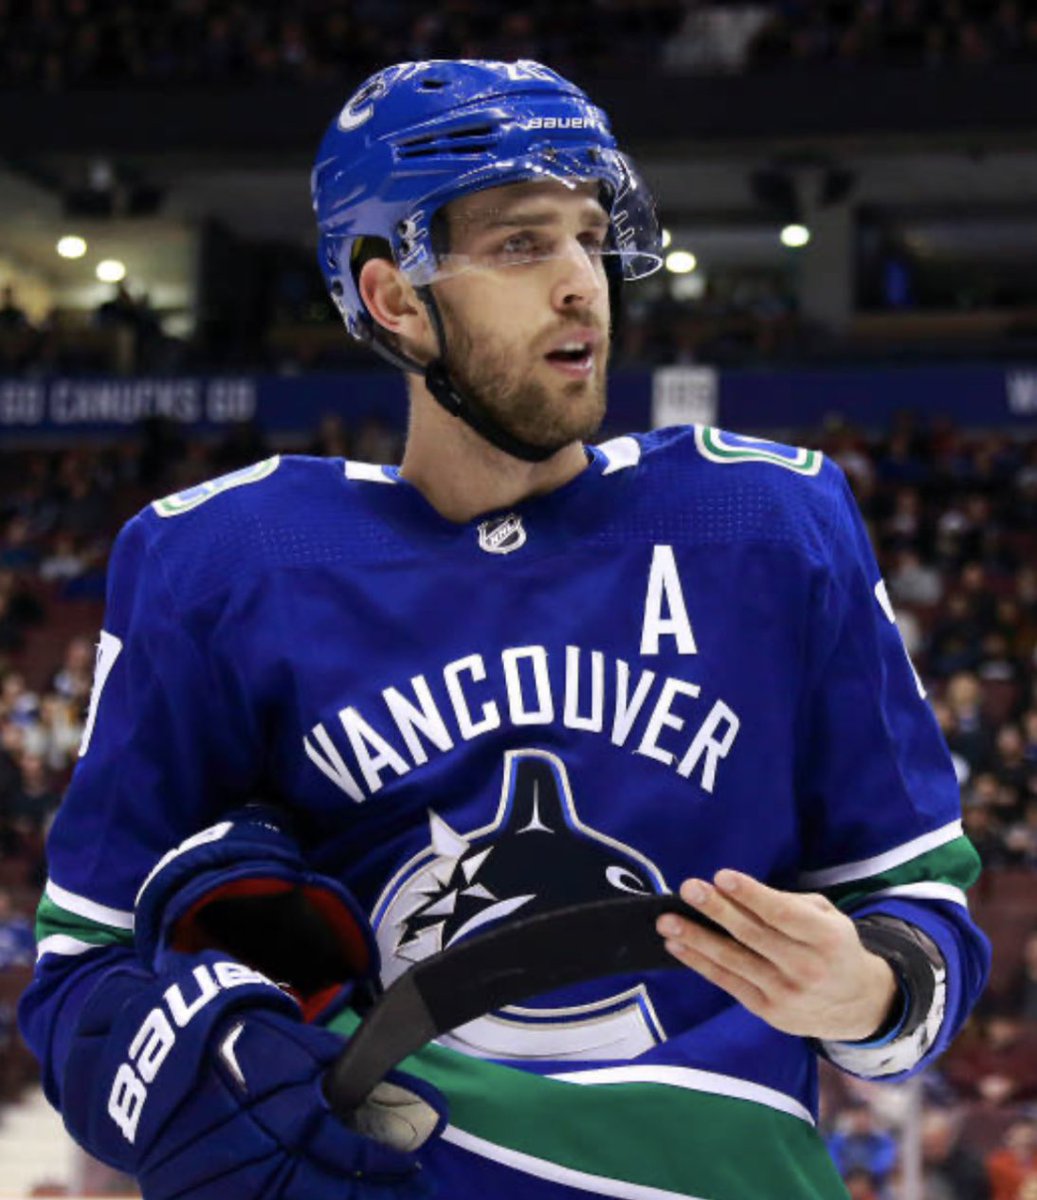 One of 9 members of the Sutter family to make it to the best league in the world. Played 13 seasons in #NHL, the last 6 being with @Canucks (2015-21). Terrific teammate & consummate pro, both on & off the ice. Congrats Brandon on a great career.